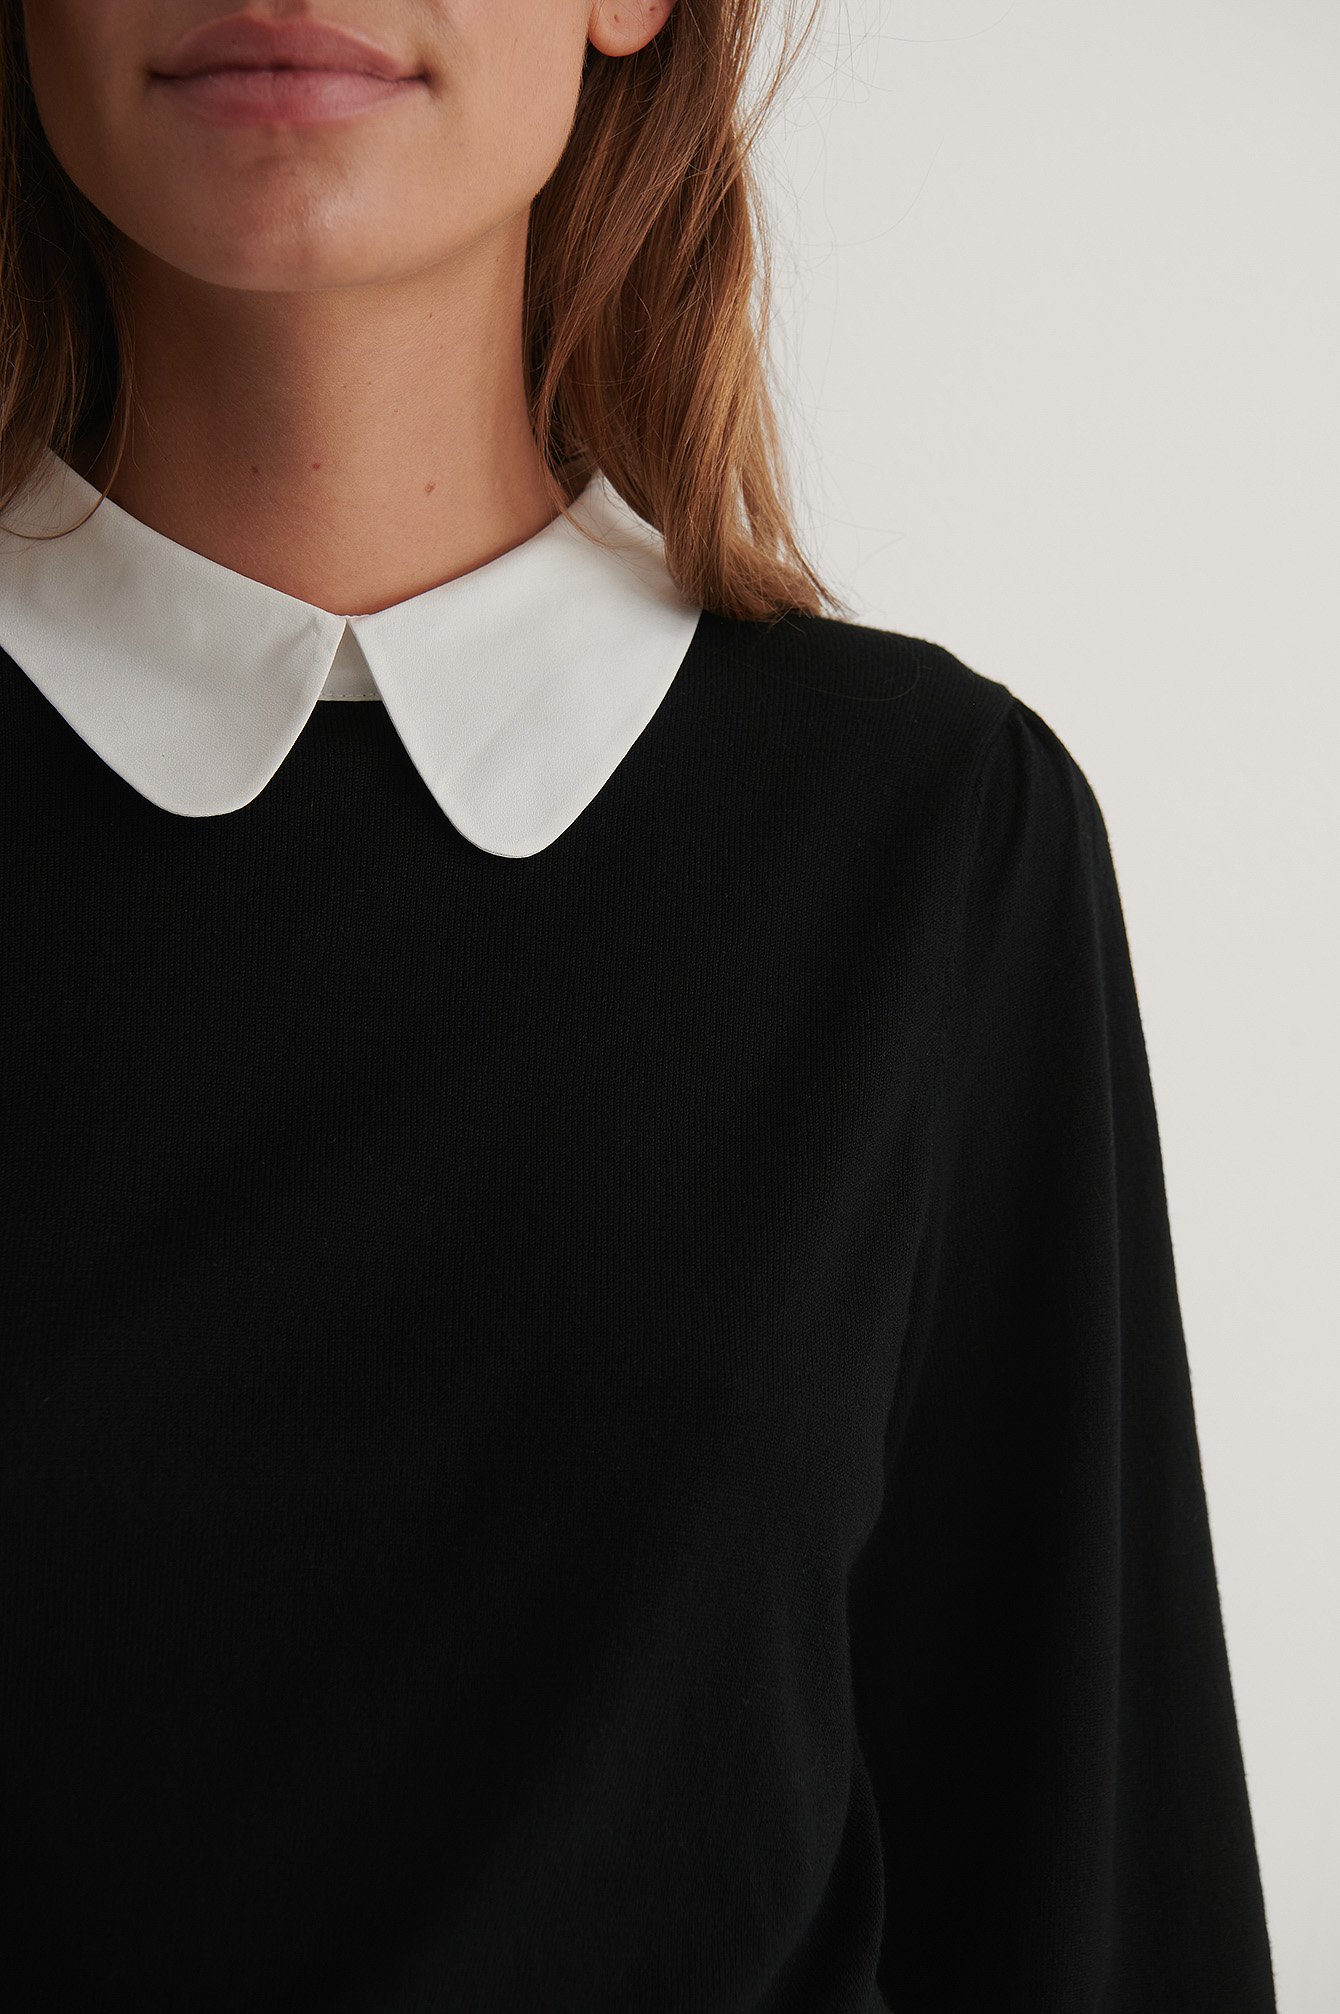 Black Contrast Collar Knitted Sweater